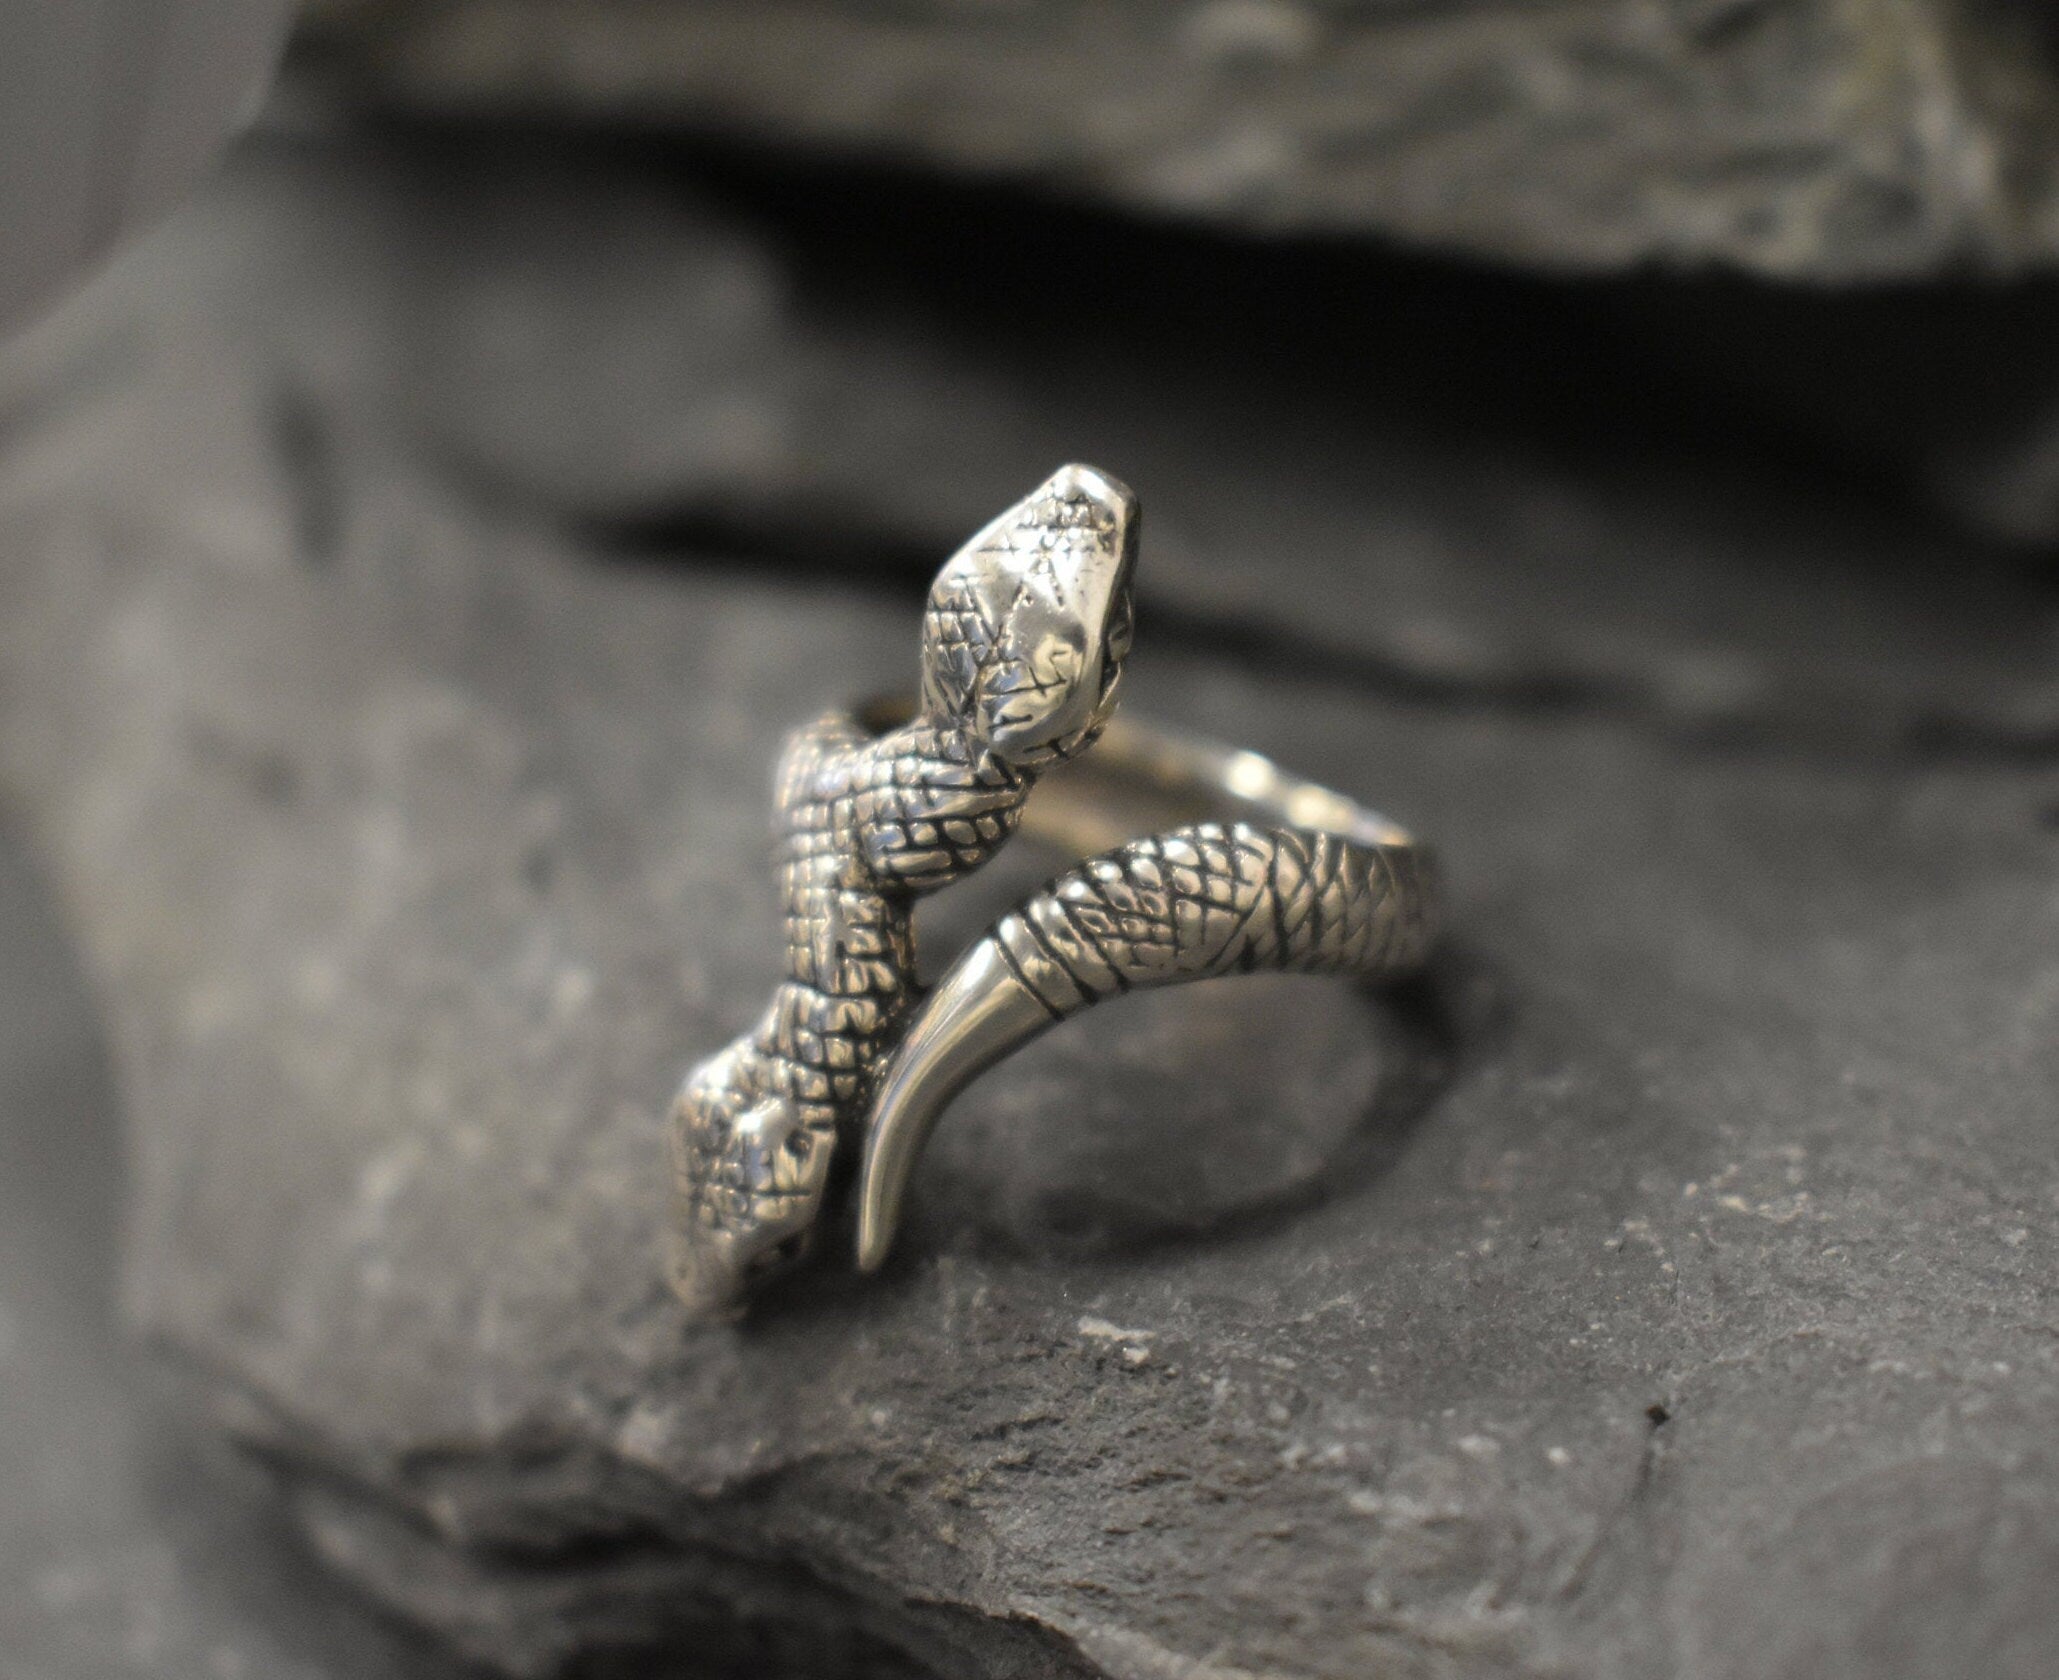 Silver Snake Ring, Long Ring, Serpent Ring, Solid Silver Ring, Two Snakes Ring, Vintage Snake Ring, Snake Head Ring, Python Ring, Statement